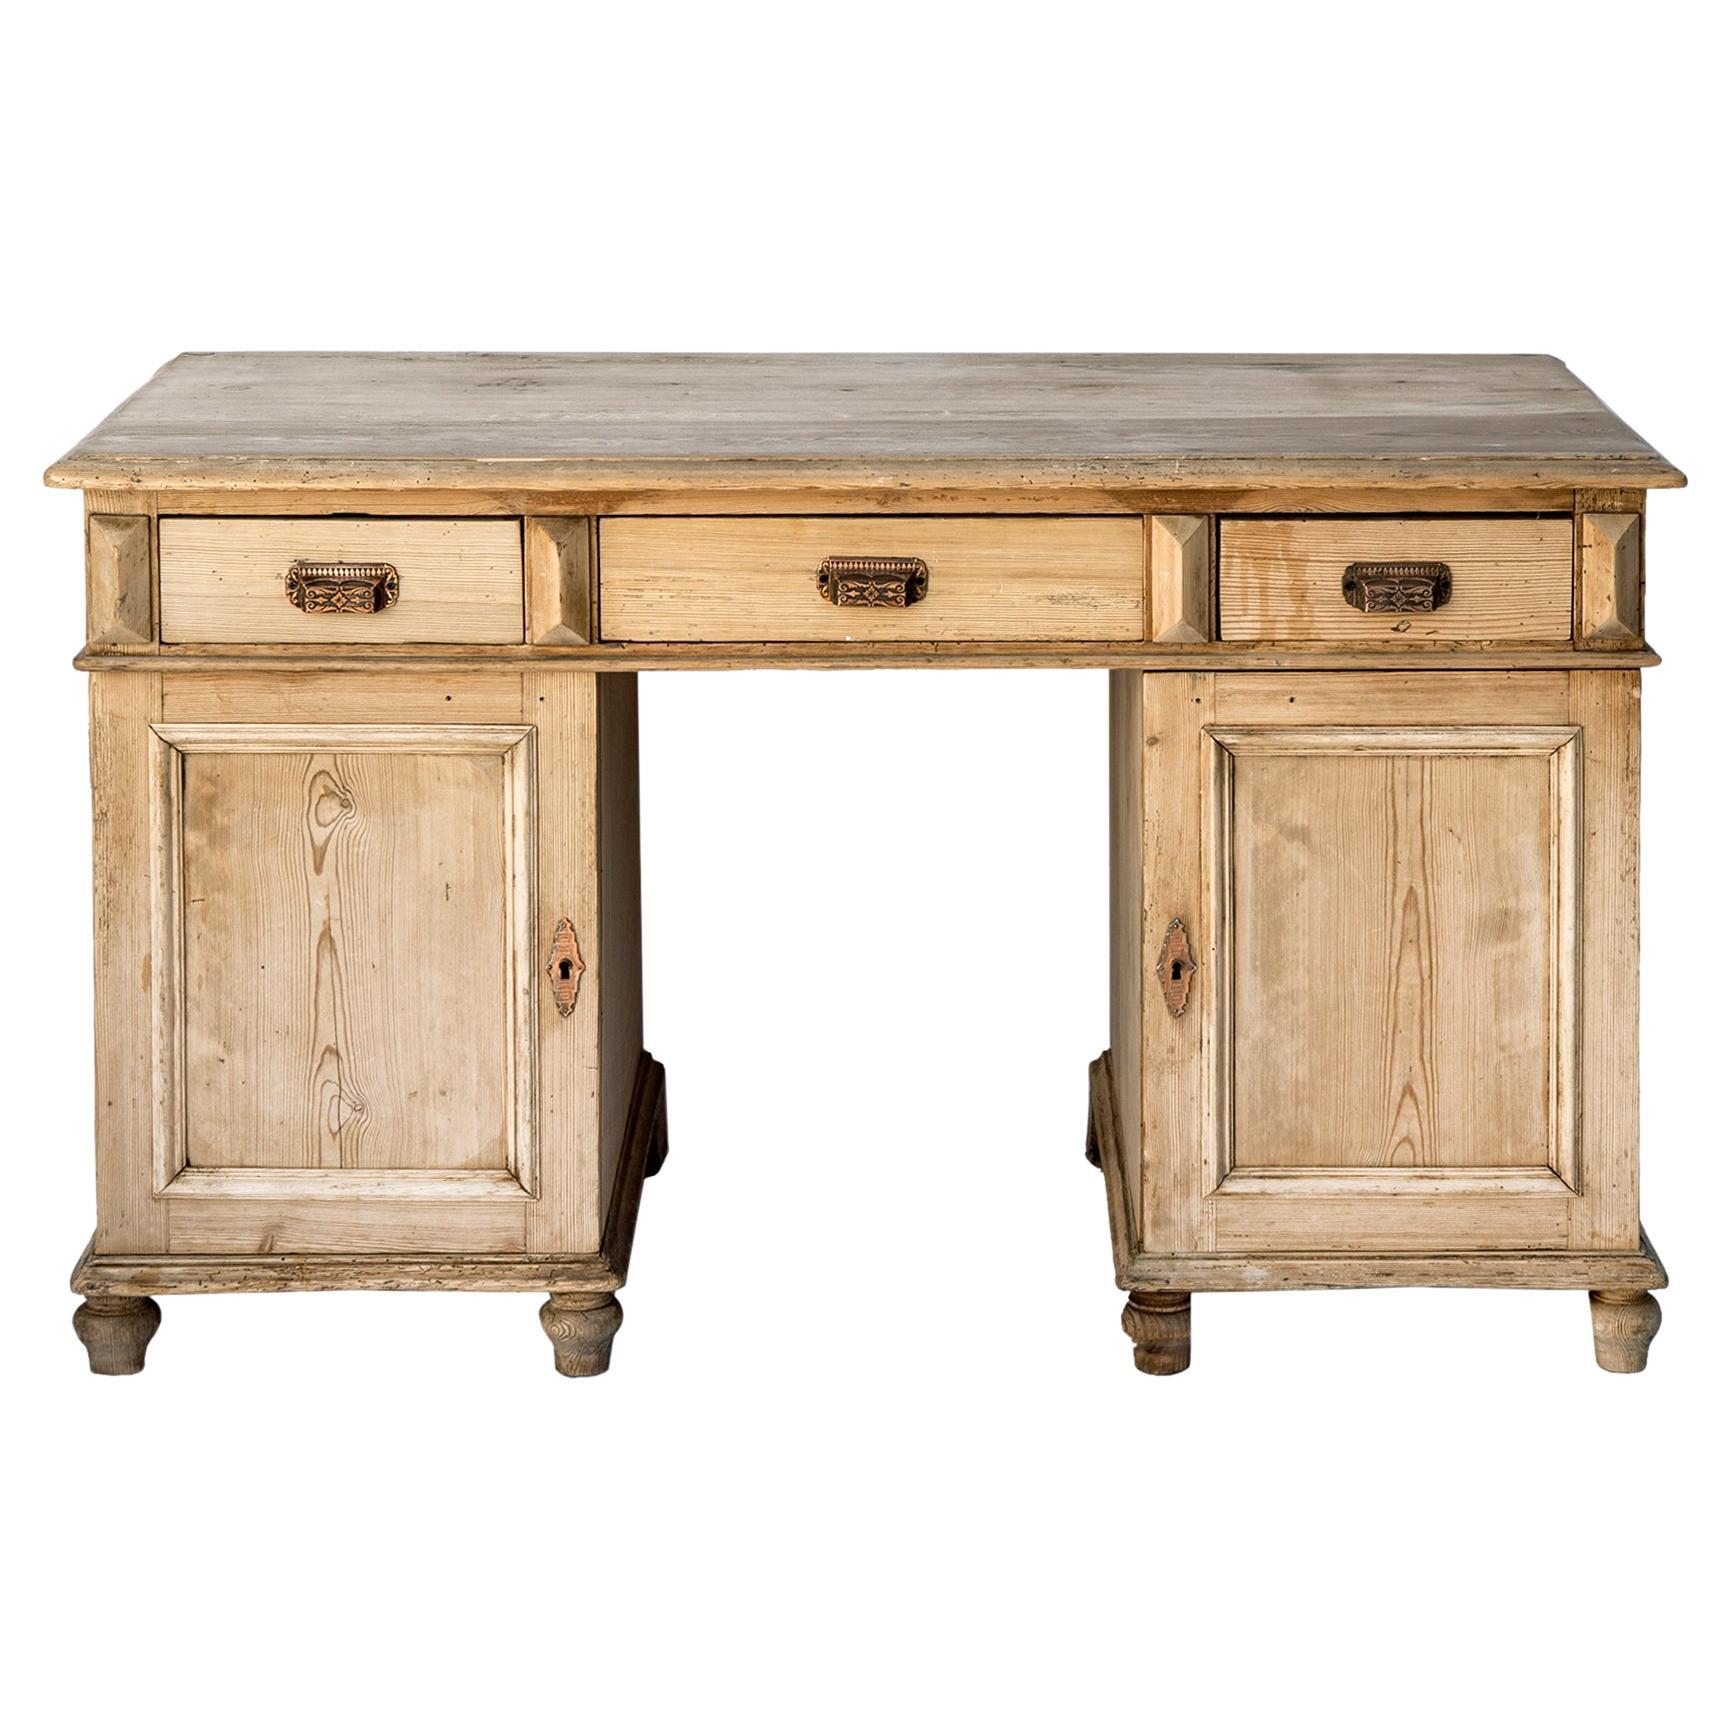 This desk is hand crafted in pine. It features two doors below the drawers on each side of the spacious drawers. 
The desk is constructed in 3 parts; the top segment includes the bank of drawers which sits on the two cabinets with doors.  The